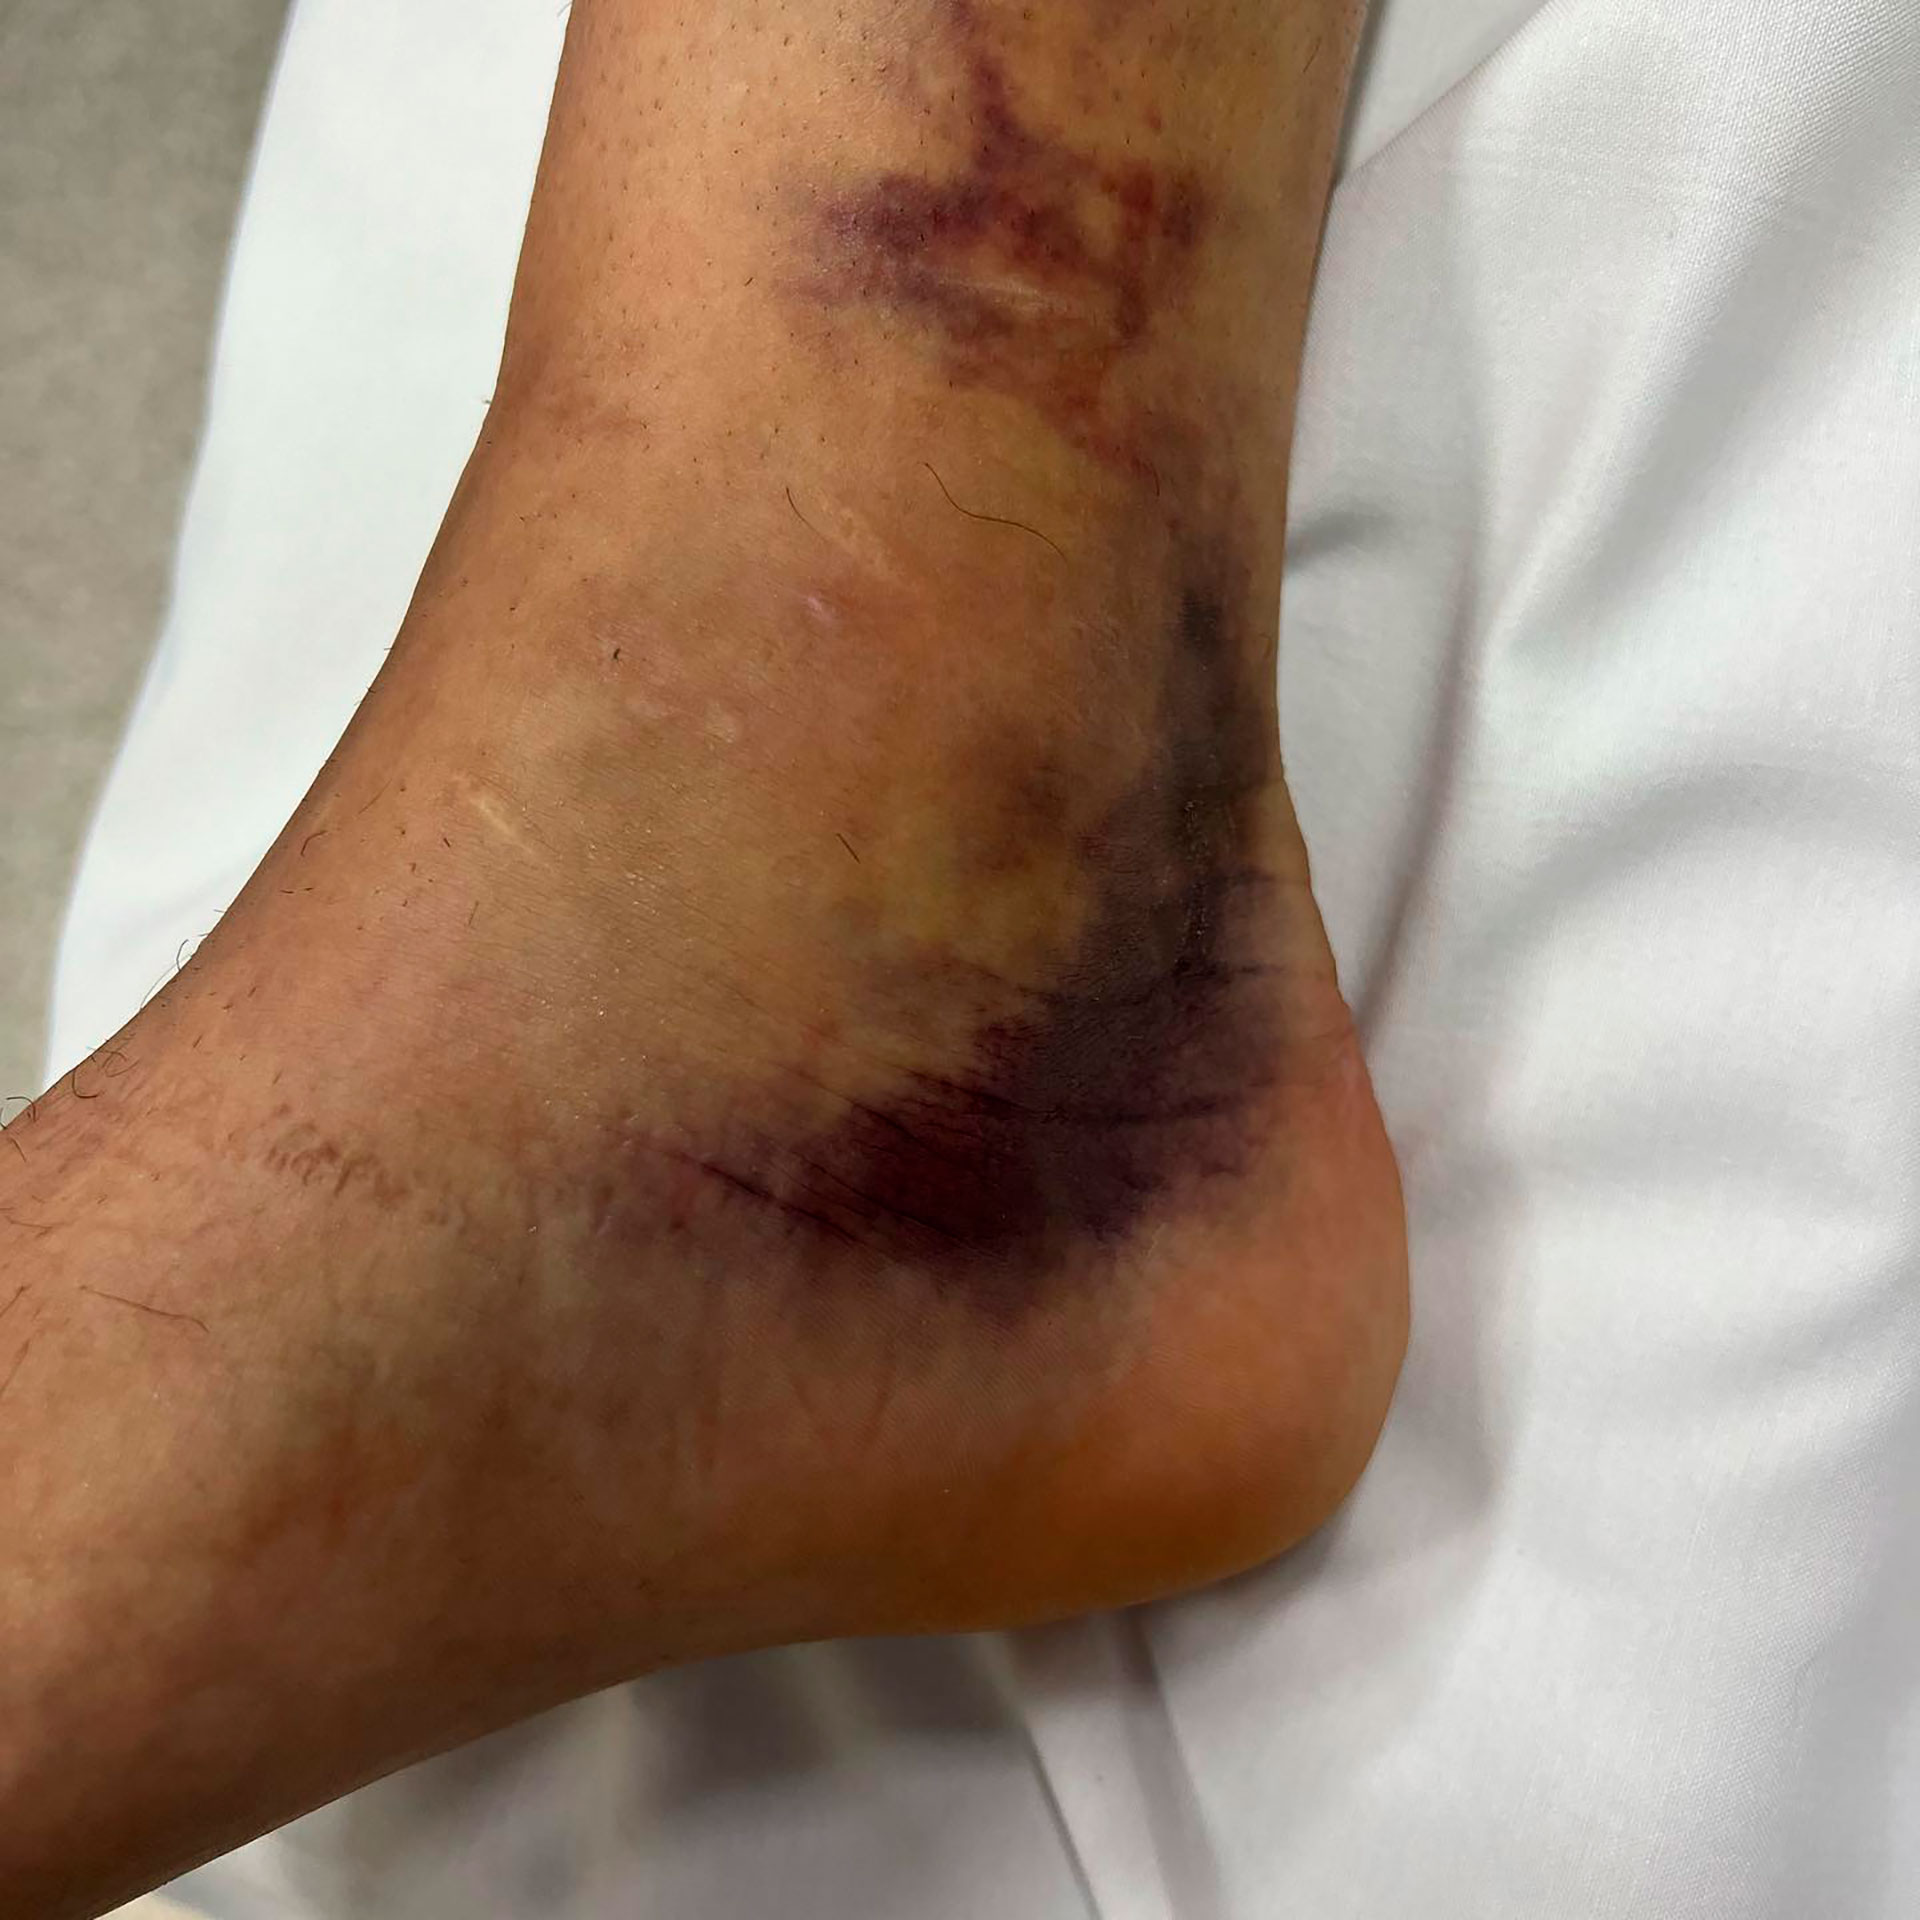 This is how Zebalos' ankle turned out